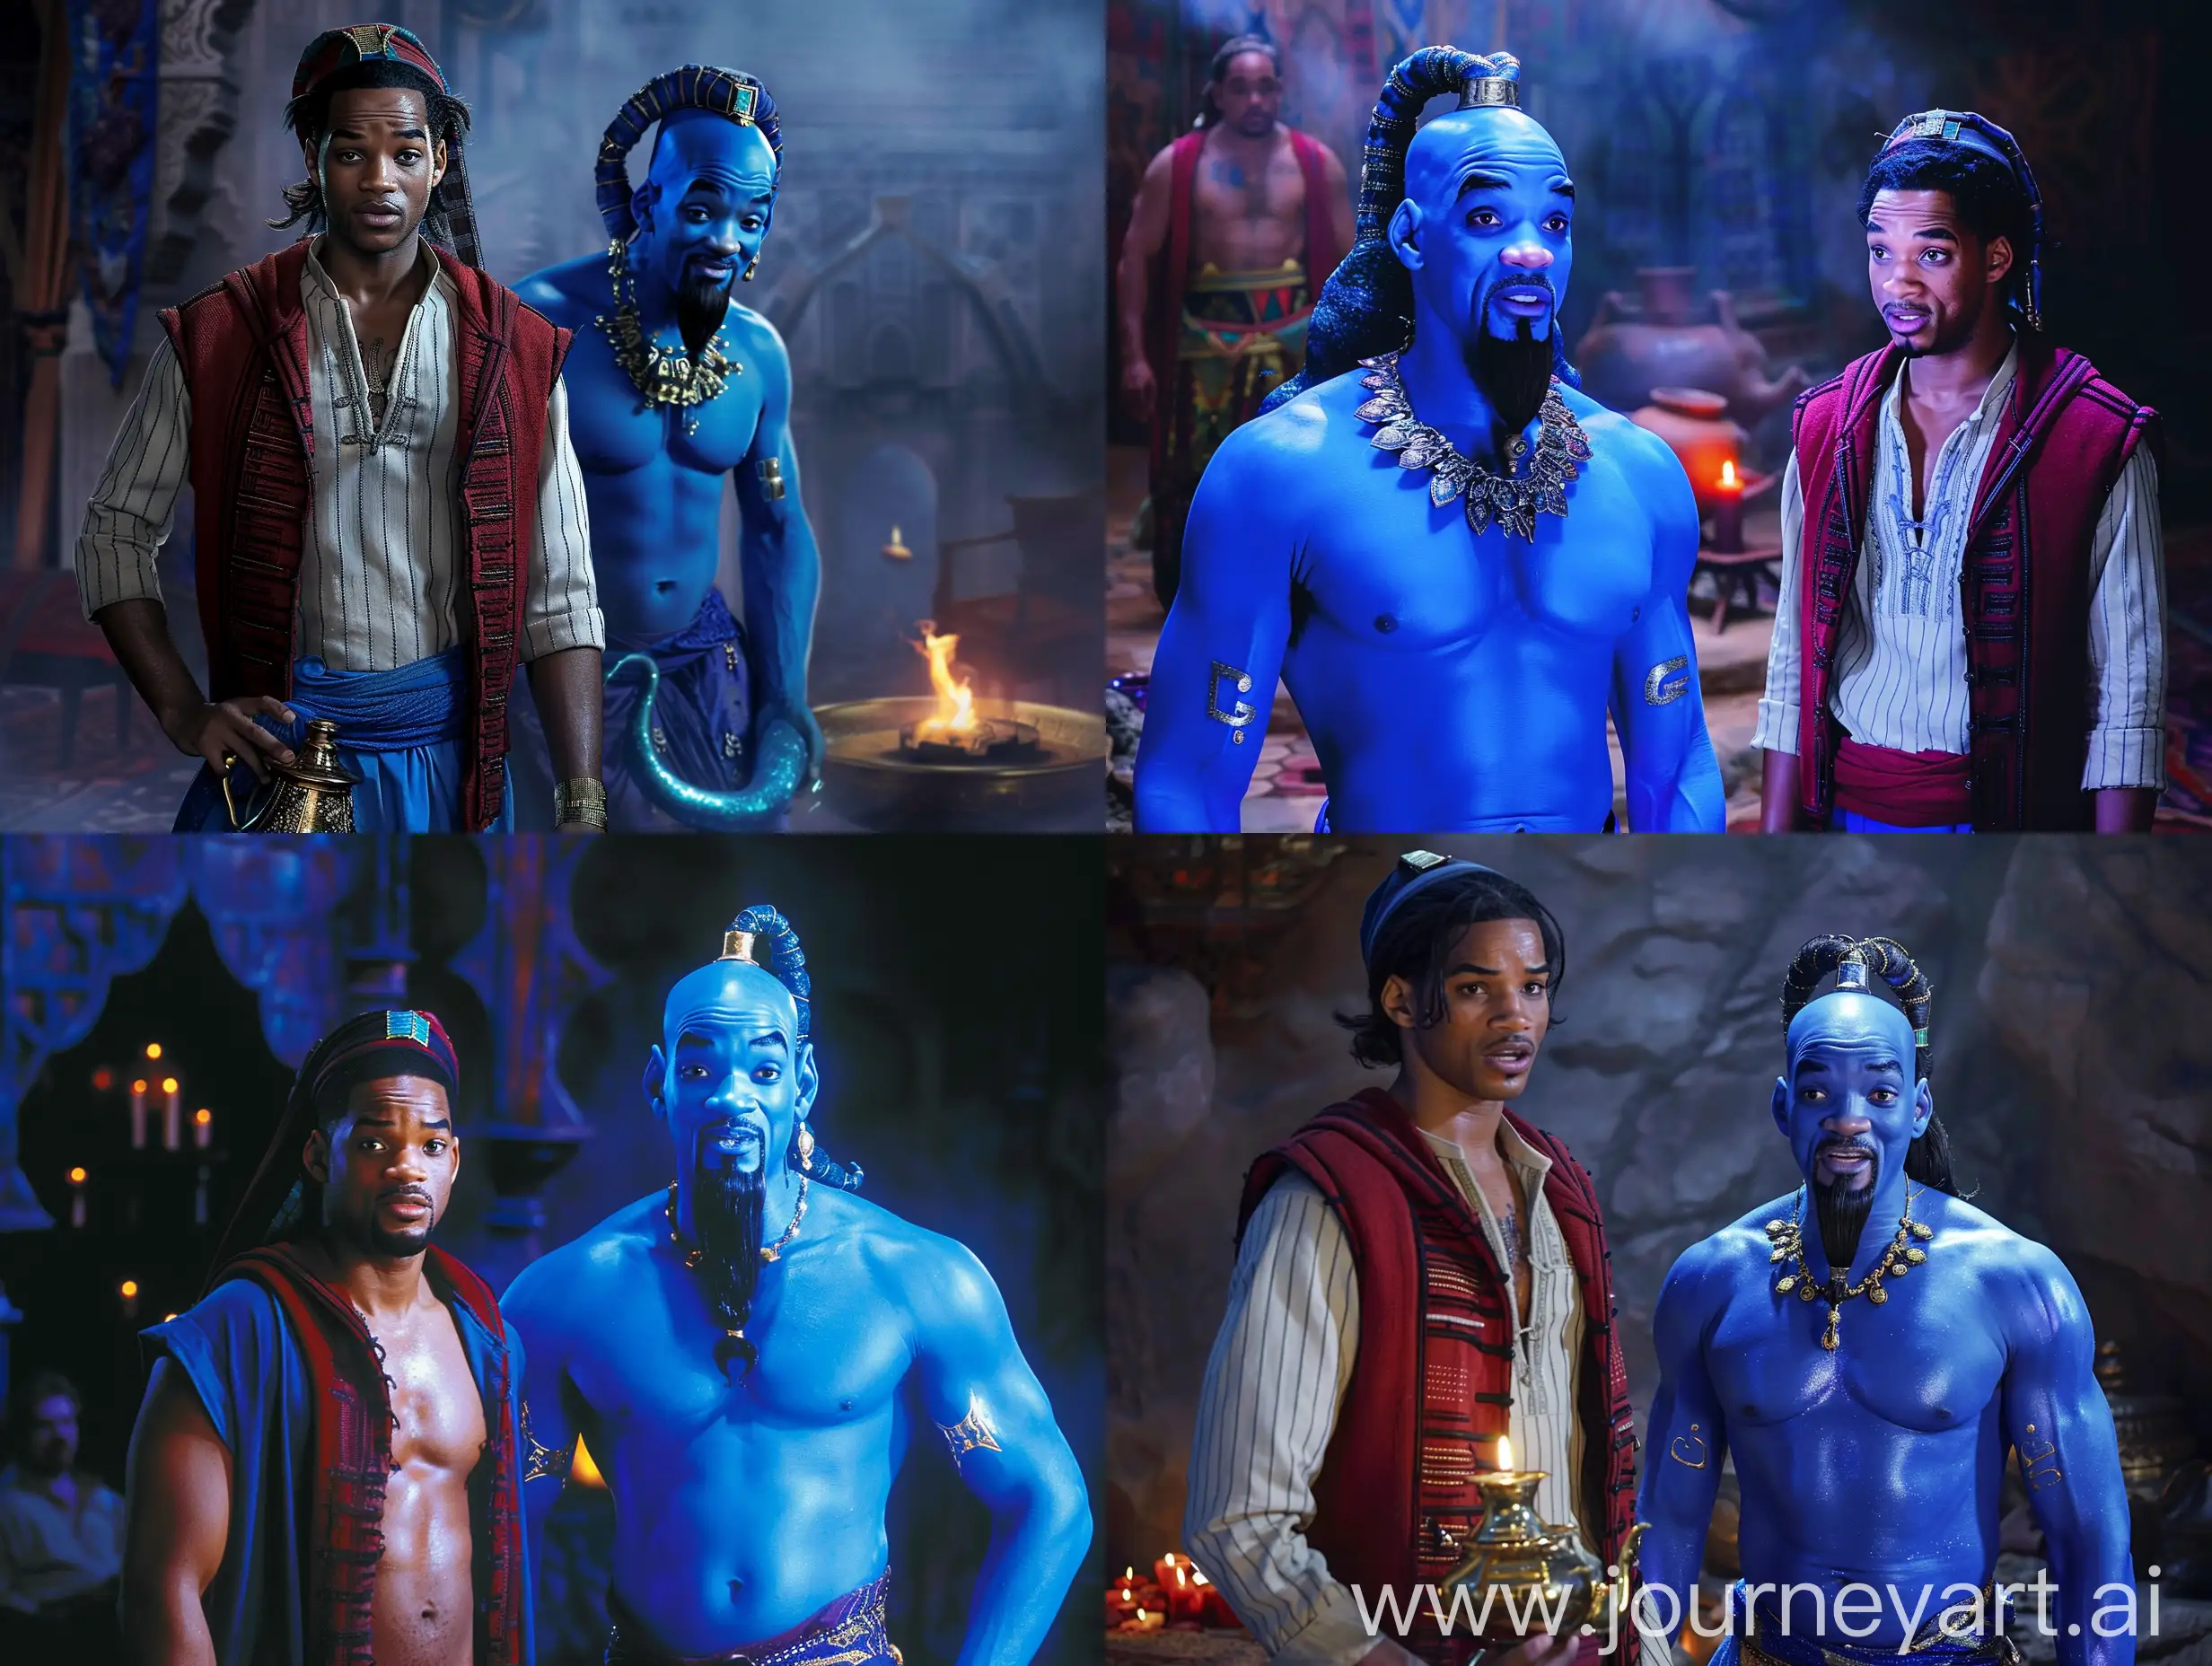 The genie stands in front of Aladdin,the big blue genie Will Smith from the lamp stands in front of Aladdin